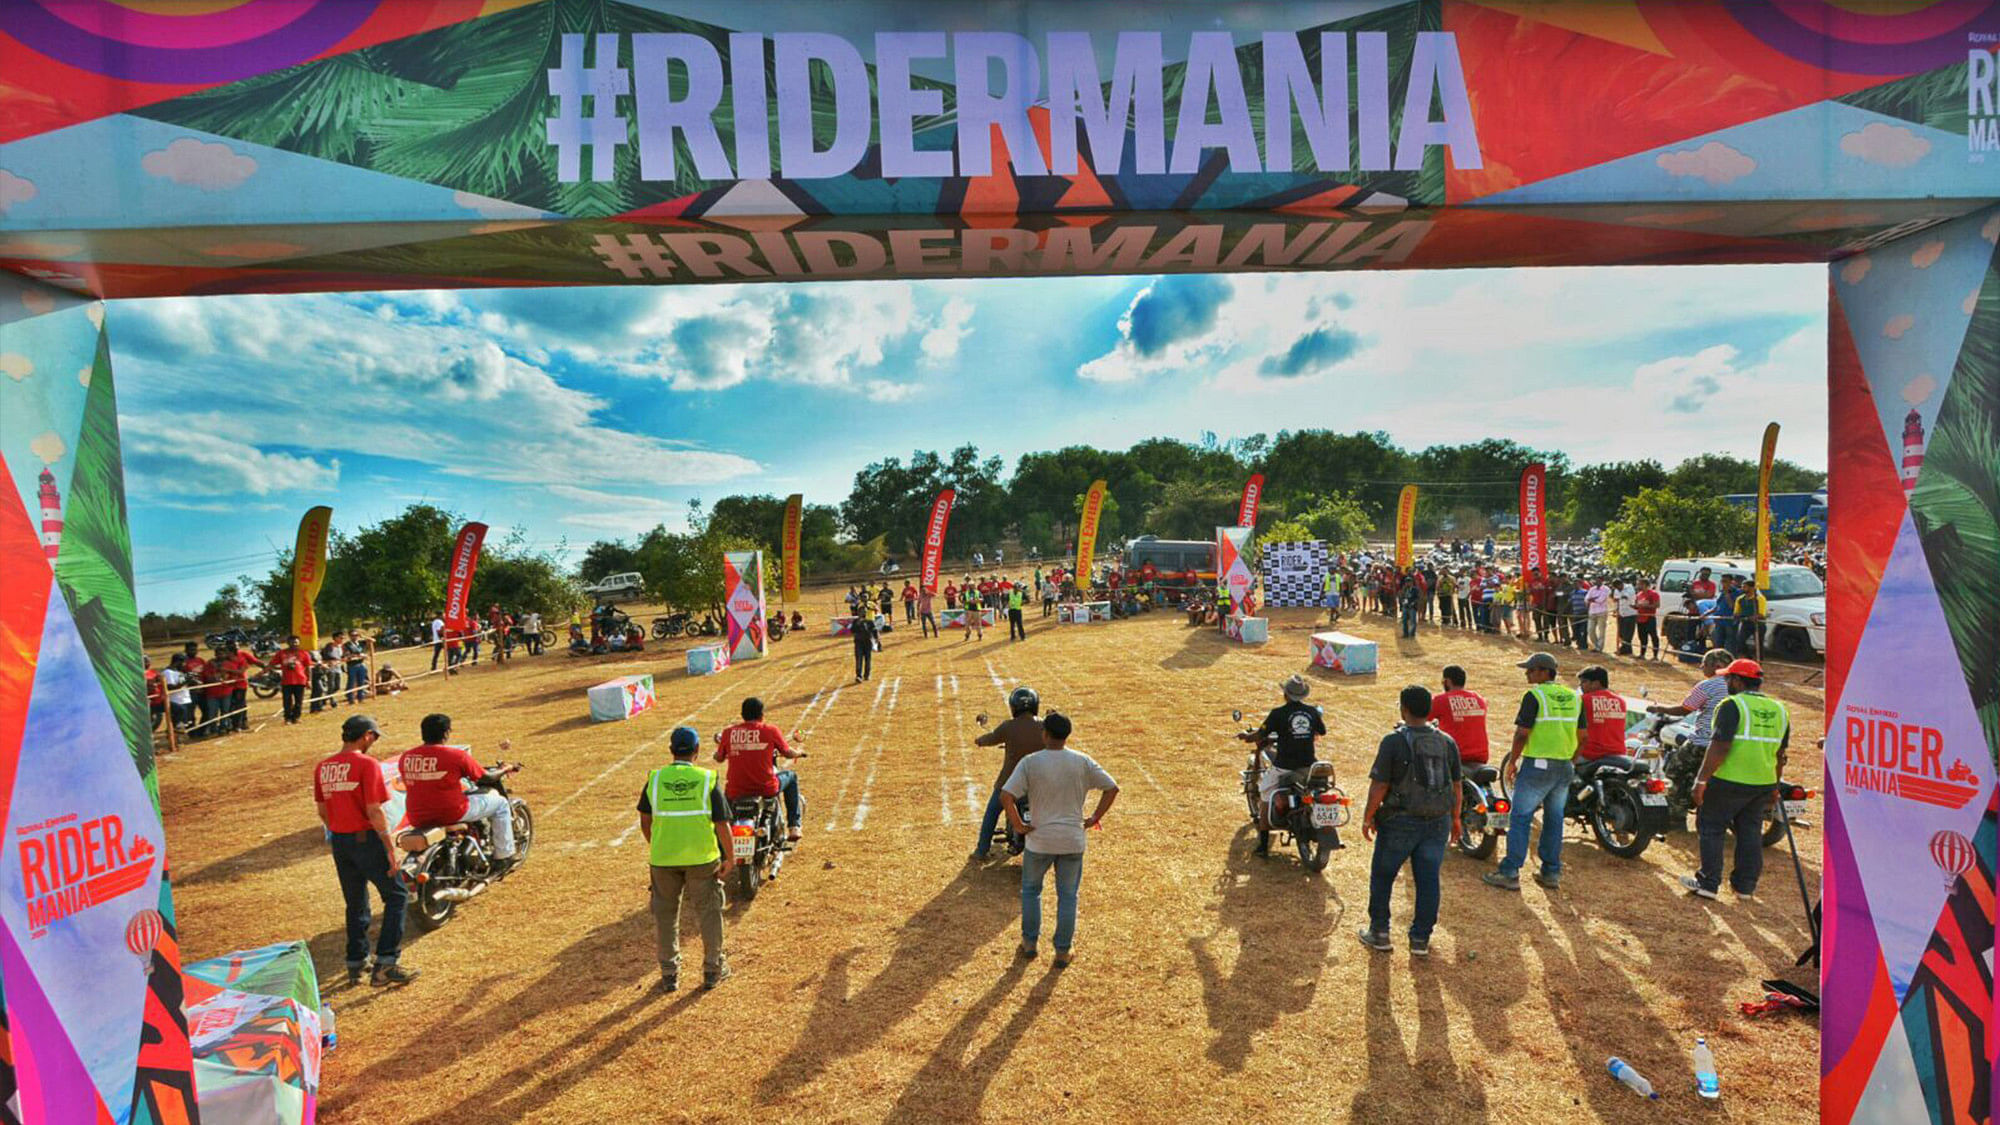 The Royal Enfield Rider Mania 2015 is being held at Vagator, Goa in its 10th edition. (Photo: <b>The Quint</b>)